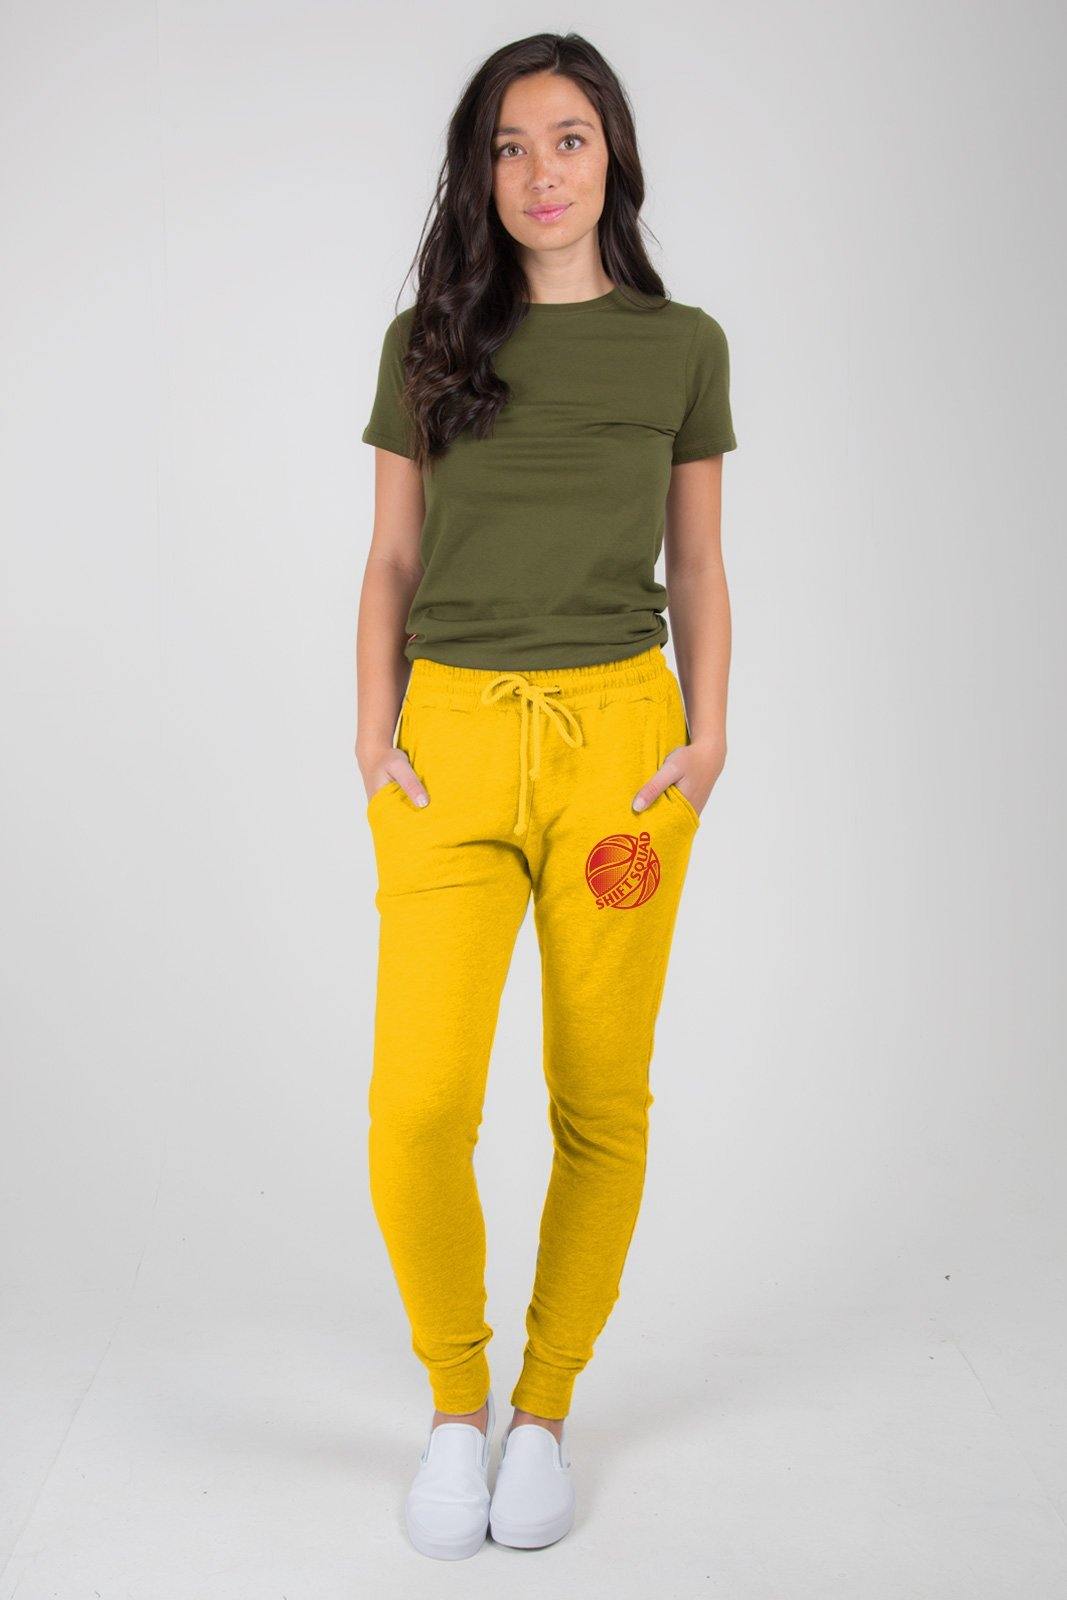 Yellow and Red Shiftsquad Women's Sweatpants Fall and Winter Line - Shiftsquad